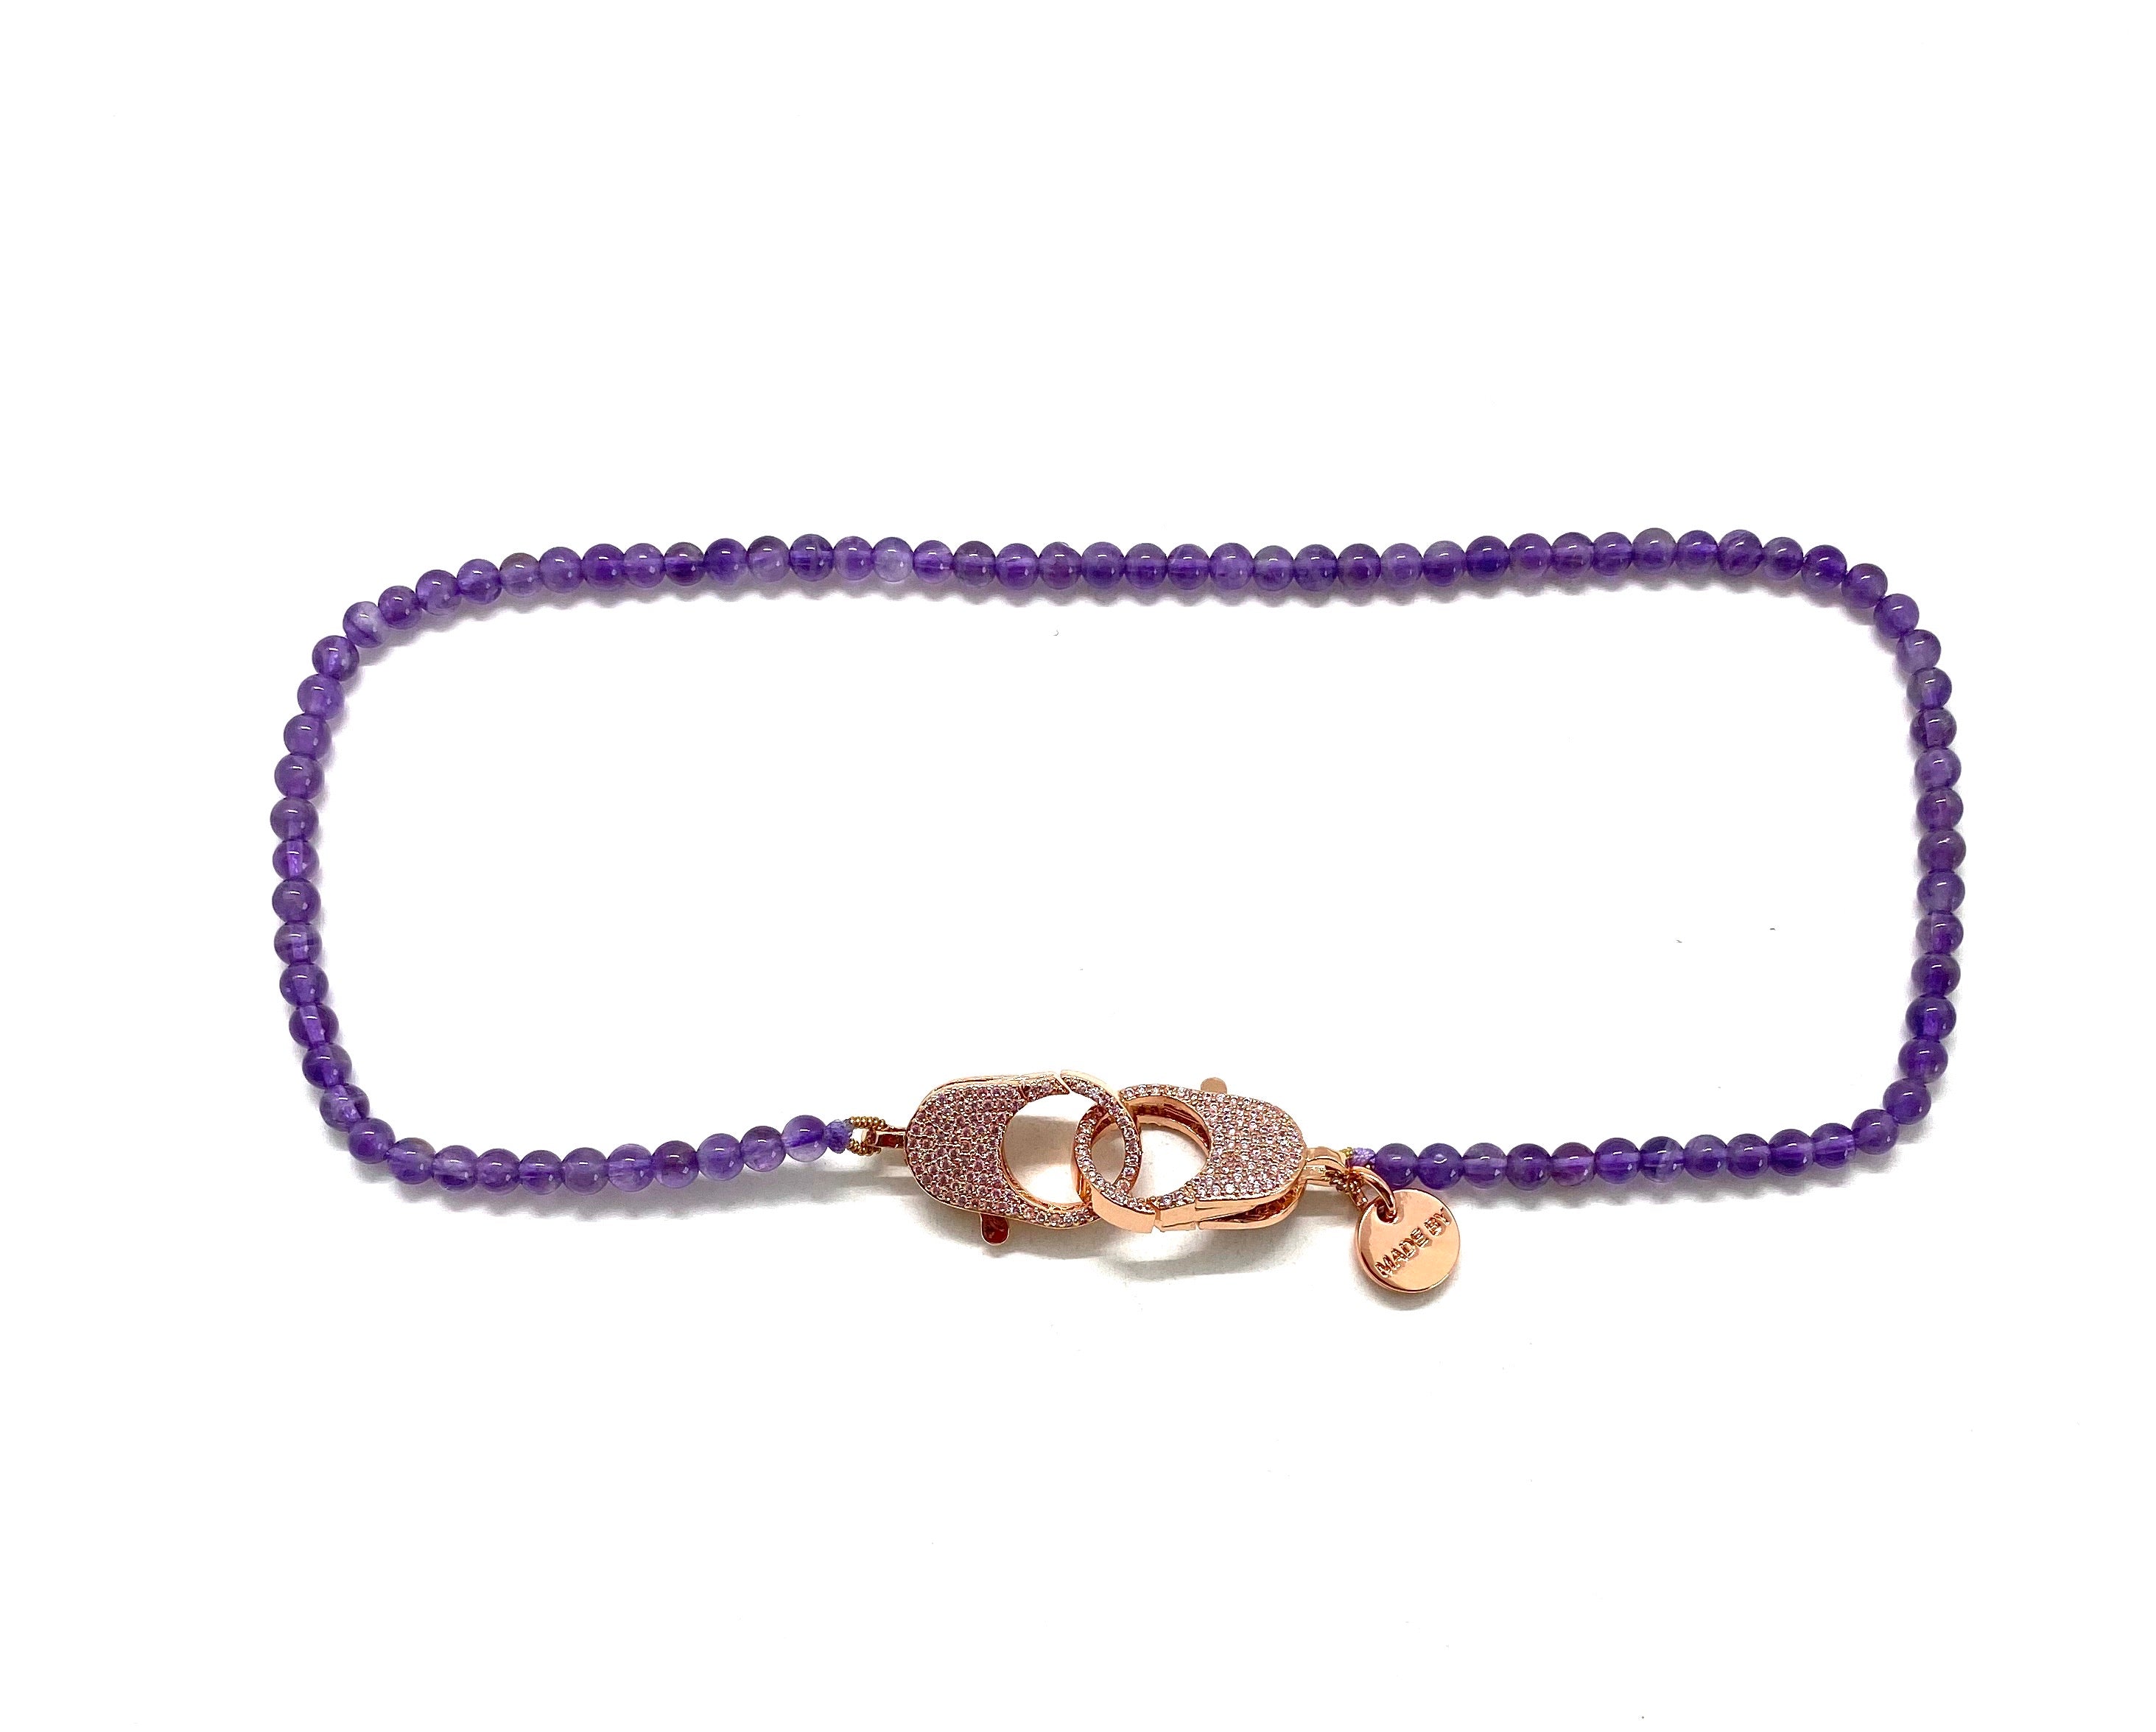 Clip to impact amethyst Christine necklace, rose clips.